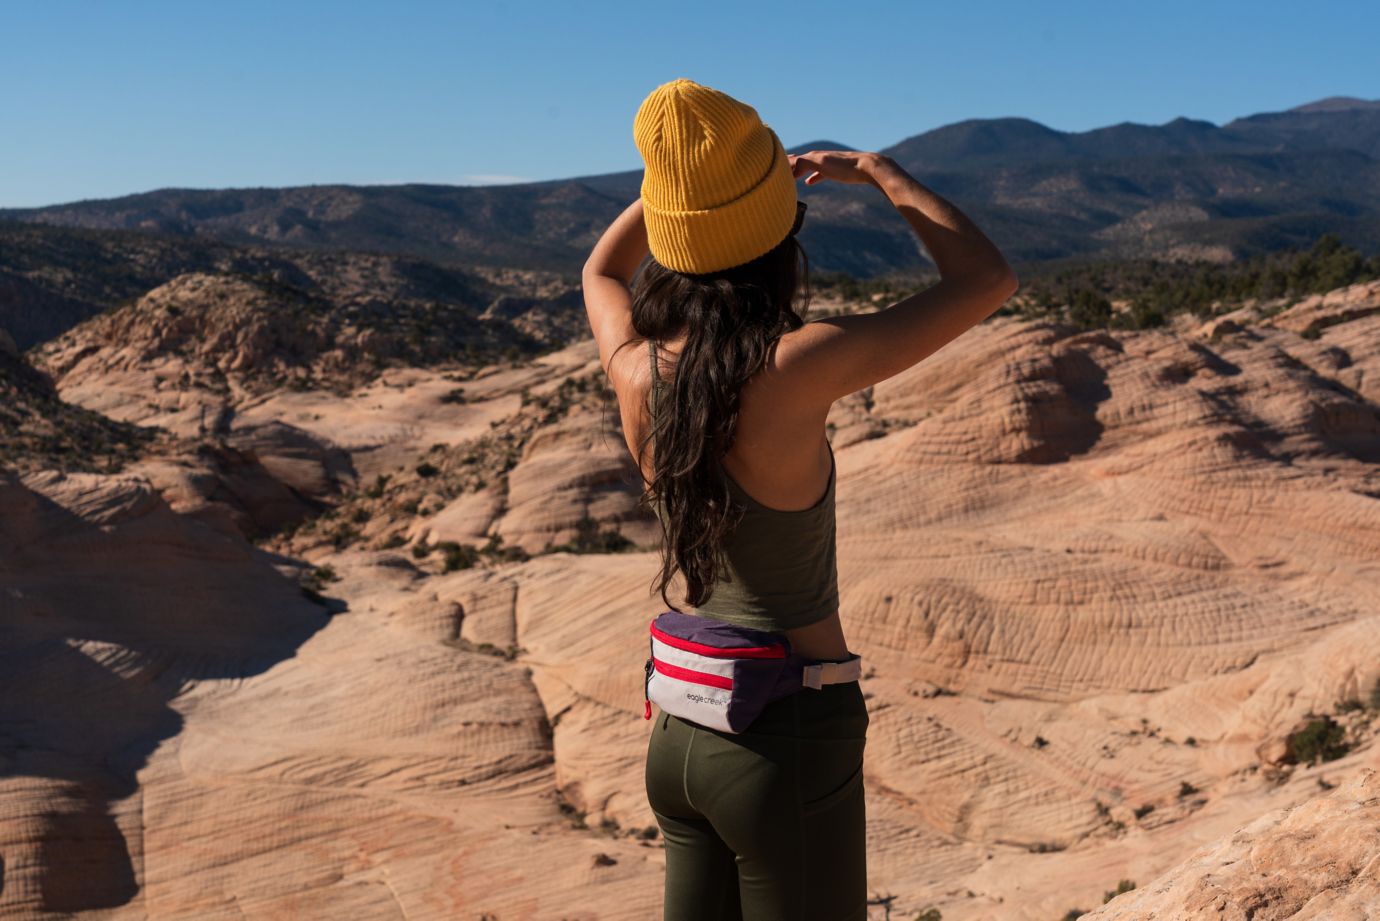 fanny packs are back, whether you like it or not